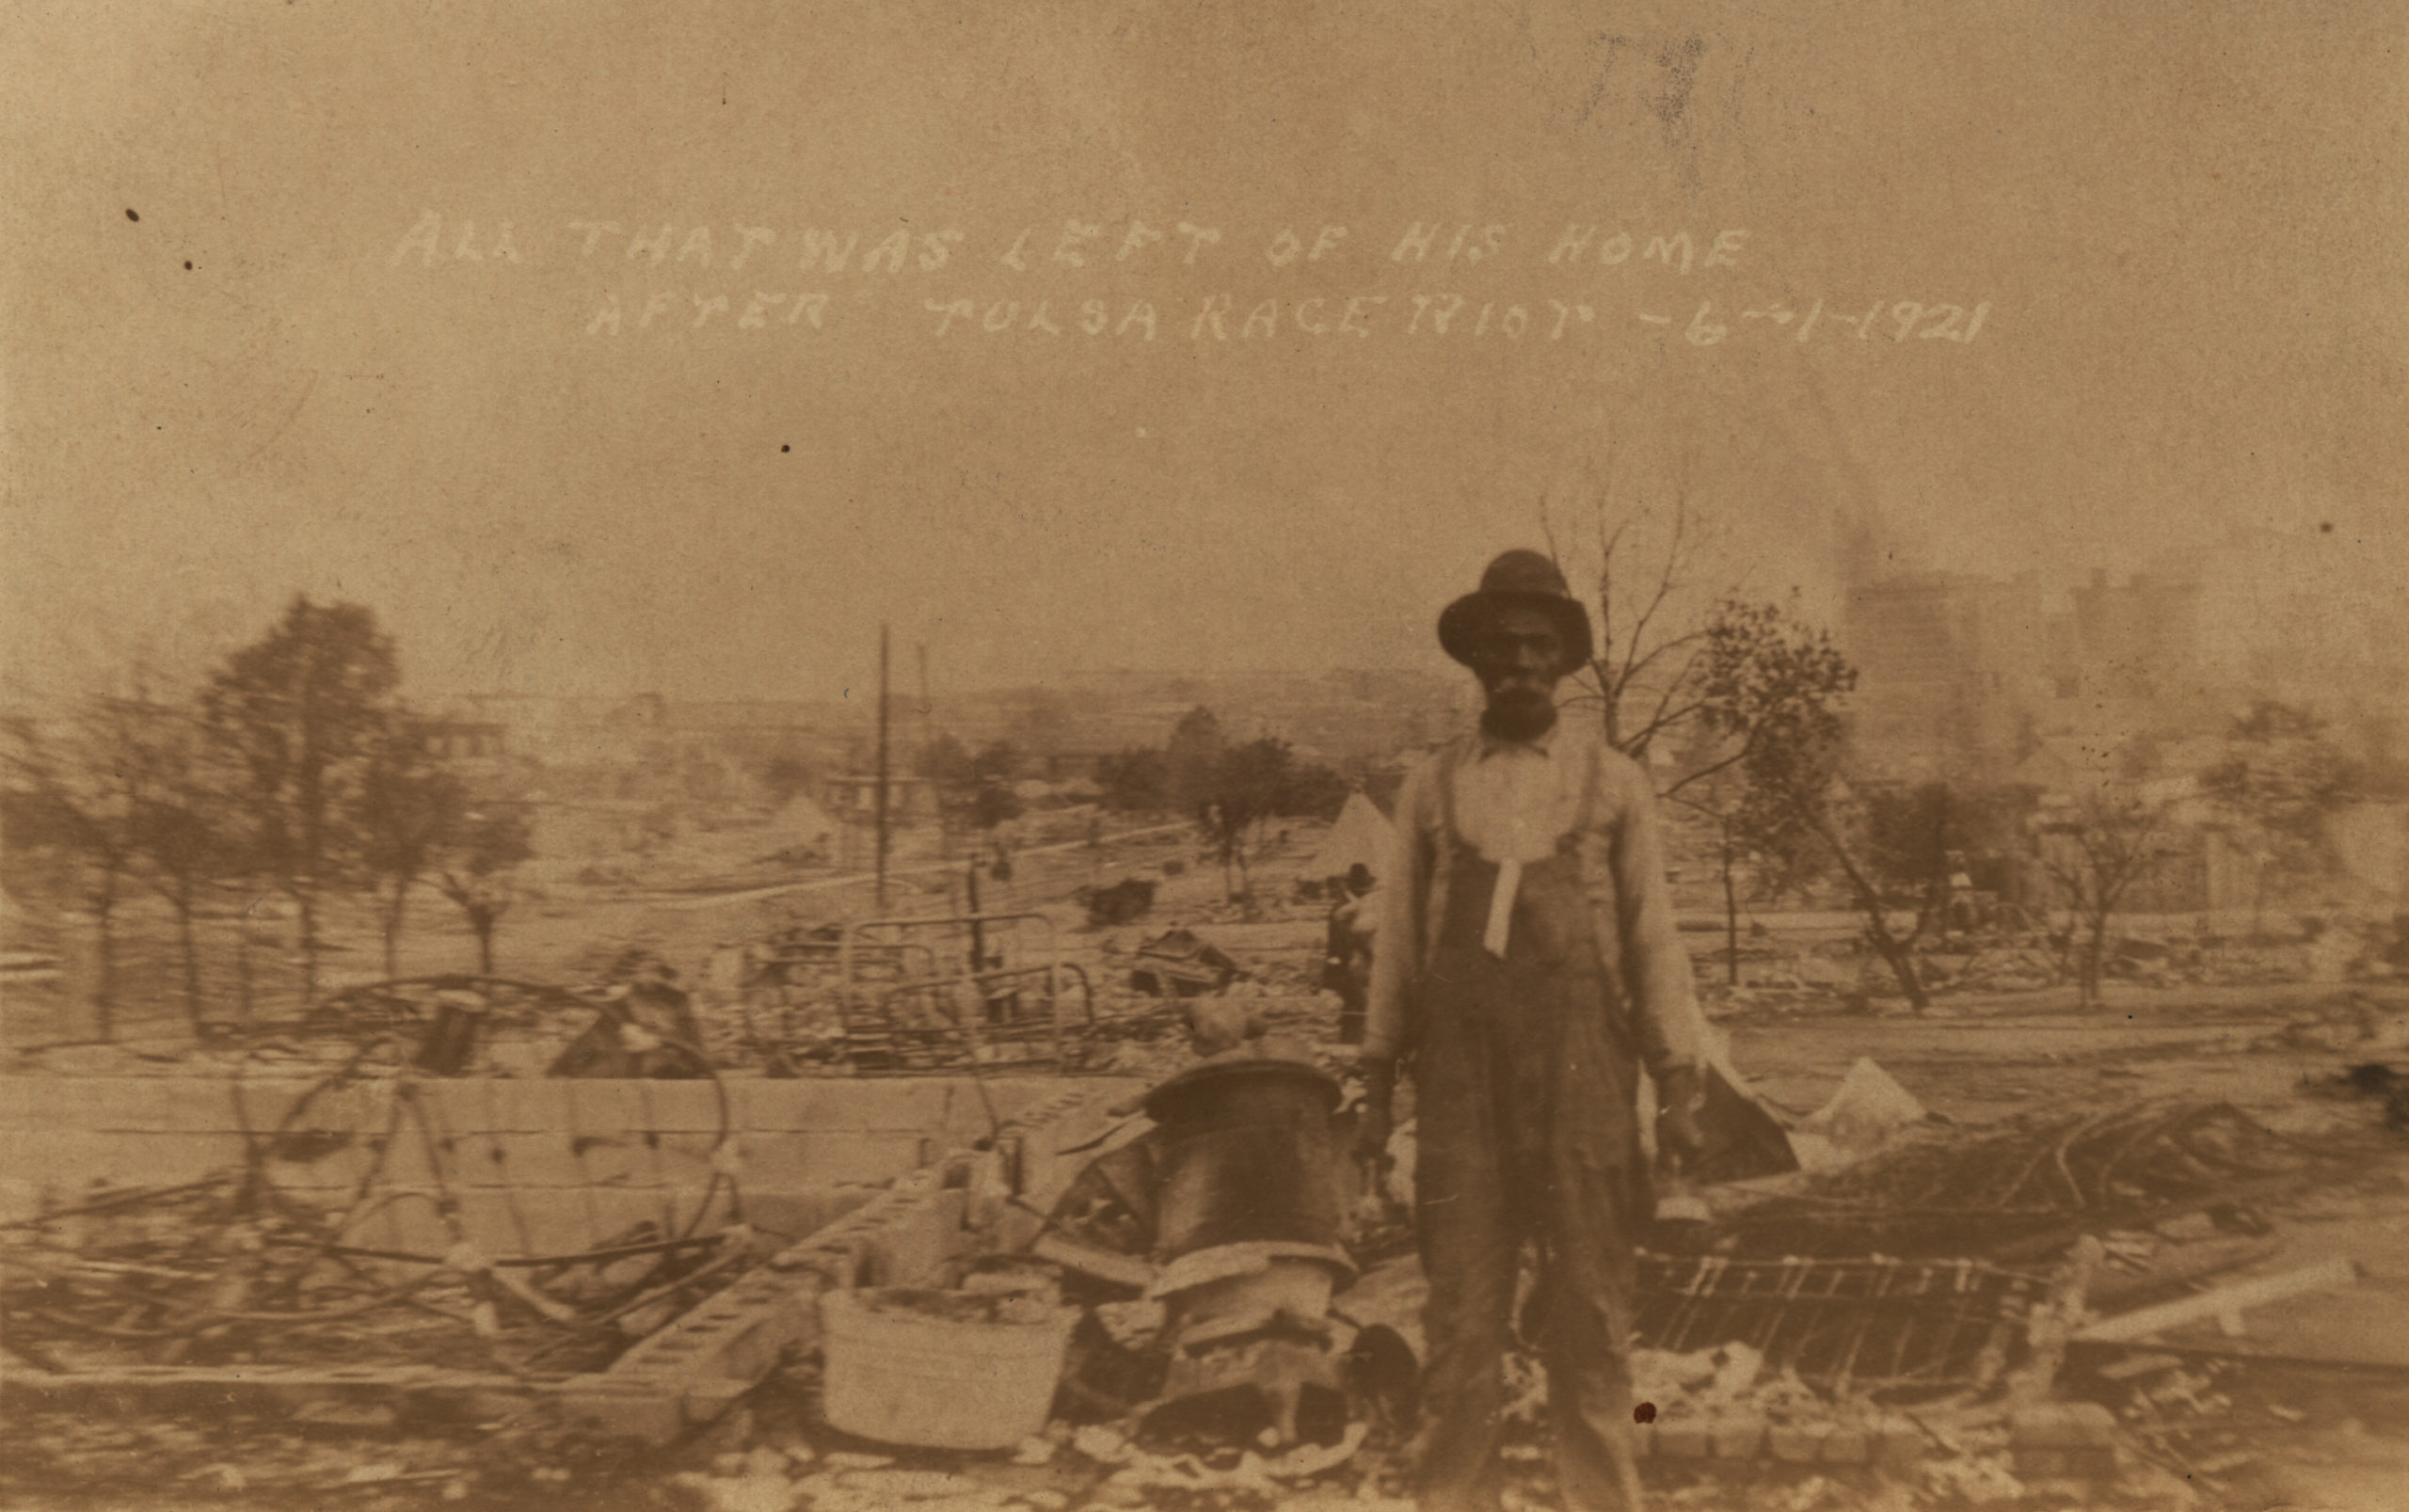 A postcard showing an unidentified man standing alone amidst the desolation and the ruins of what is described as his home. The placement of the ruins of Dunbar Elementary School in the background indicates that this photo was taken on either North Greenwood Ave. or North Frankfort Ave.